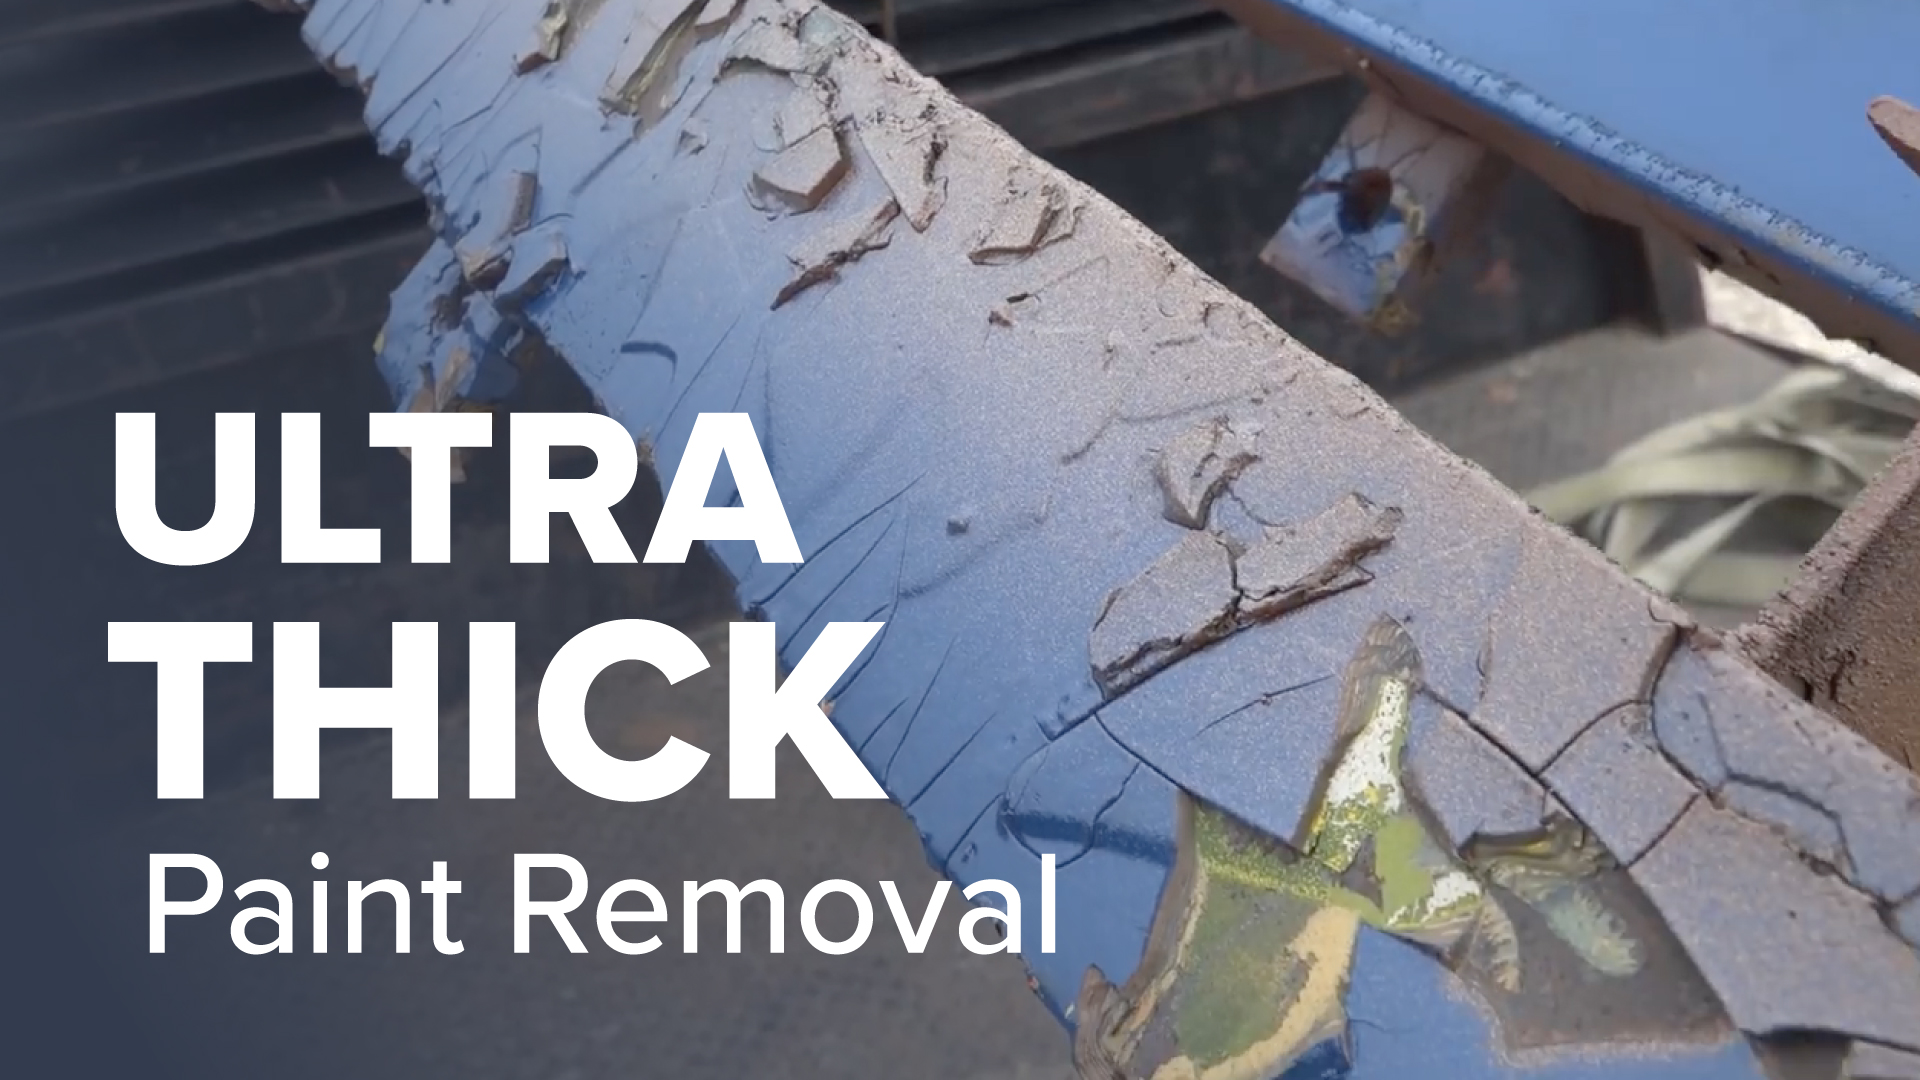 SUPER-THICK-Paint-Removal-with-the-Dustless-Blaster!-thumbnail-words